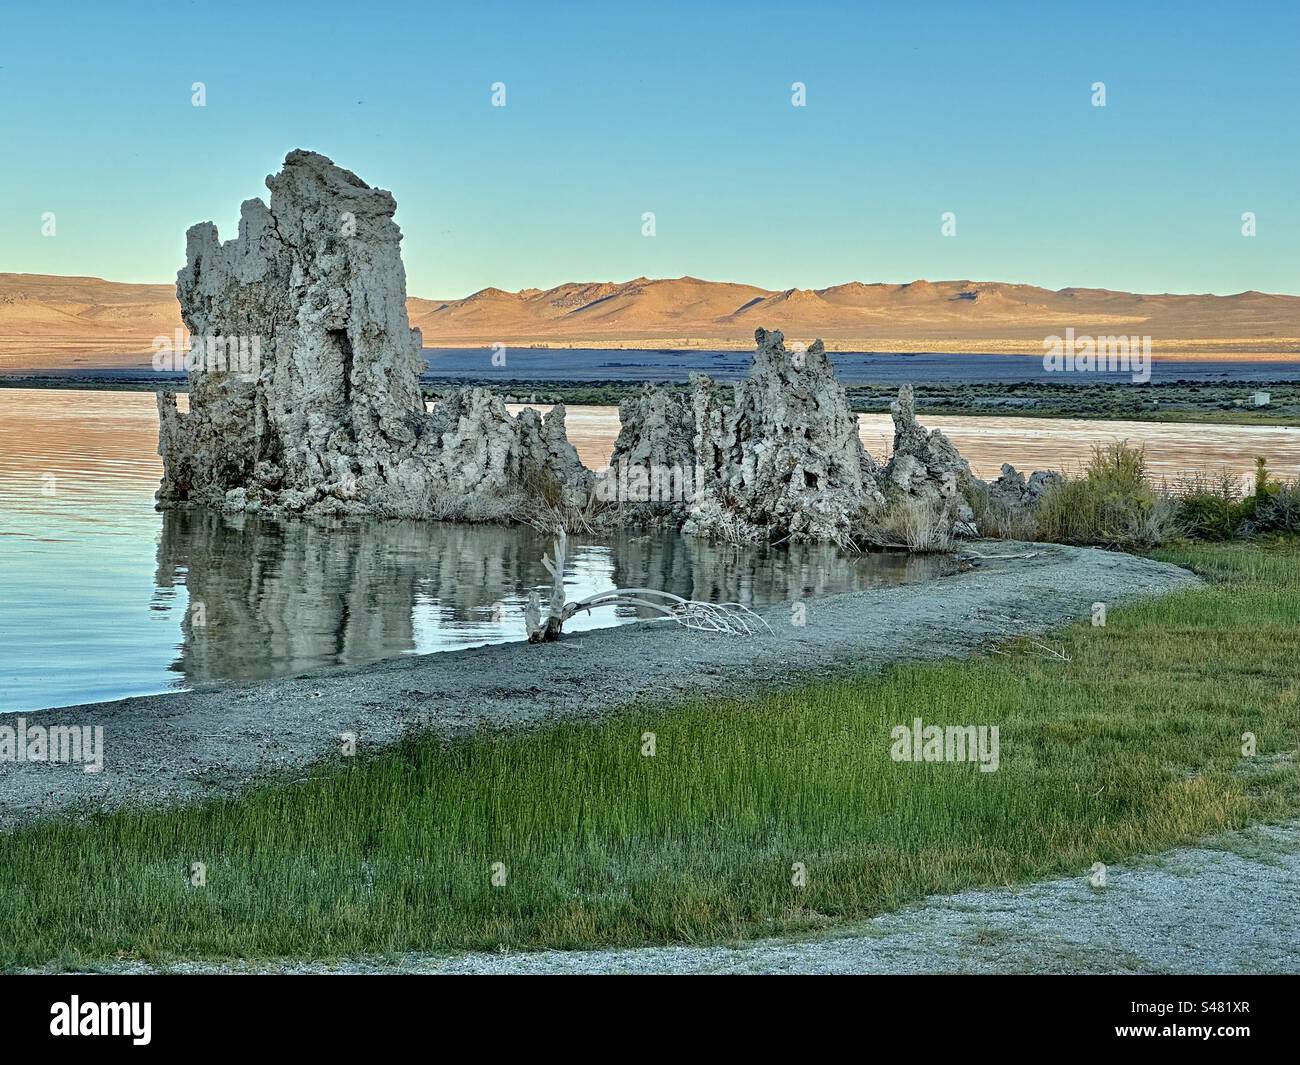 Distinctive tufa (limestone) towers of Mono Lake in central California formed around springs at the bottom of the lake over decades or even centuries and were revealed as water levels fell. Stock Photo